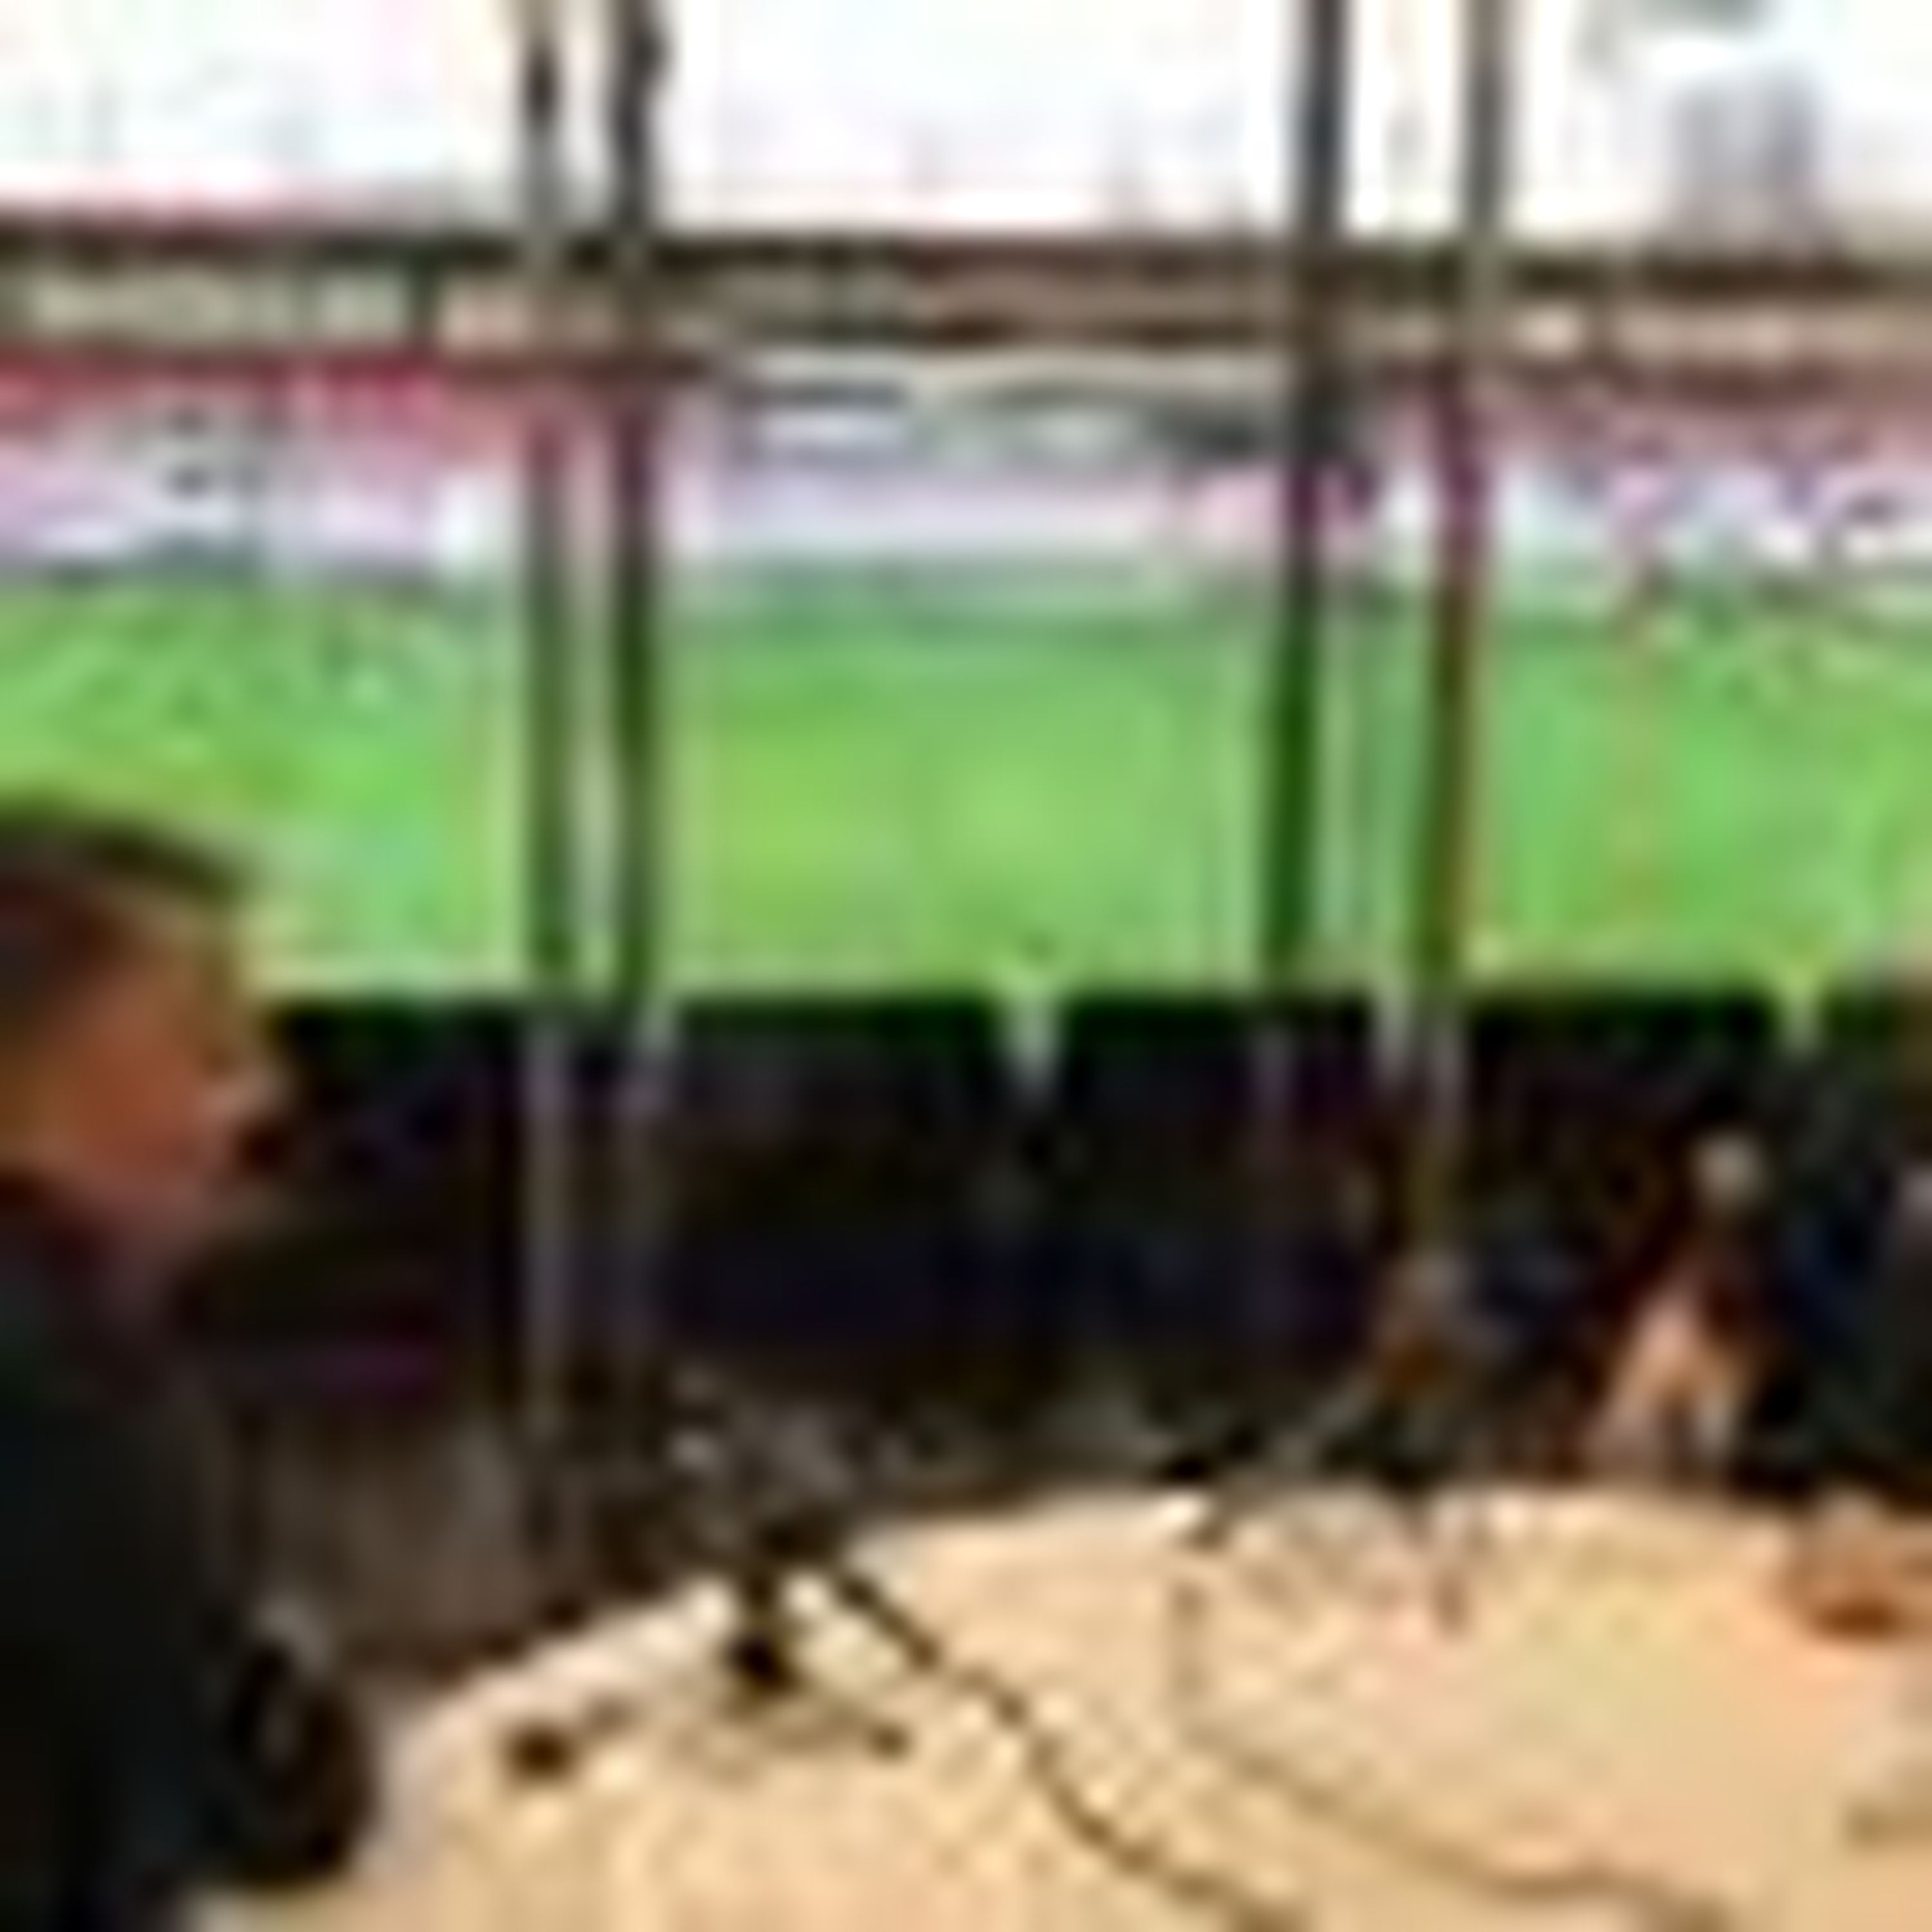 Eddie Howe: An English coach – amazing behind the scenes insight into the life of a Premier League manager with Guillem Balague